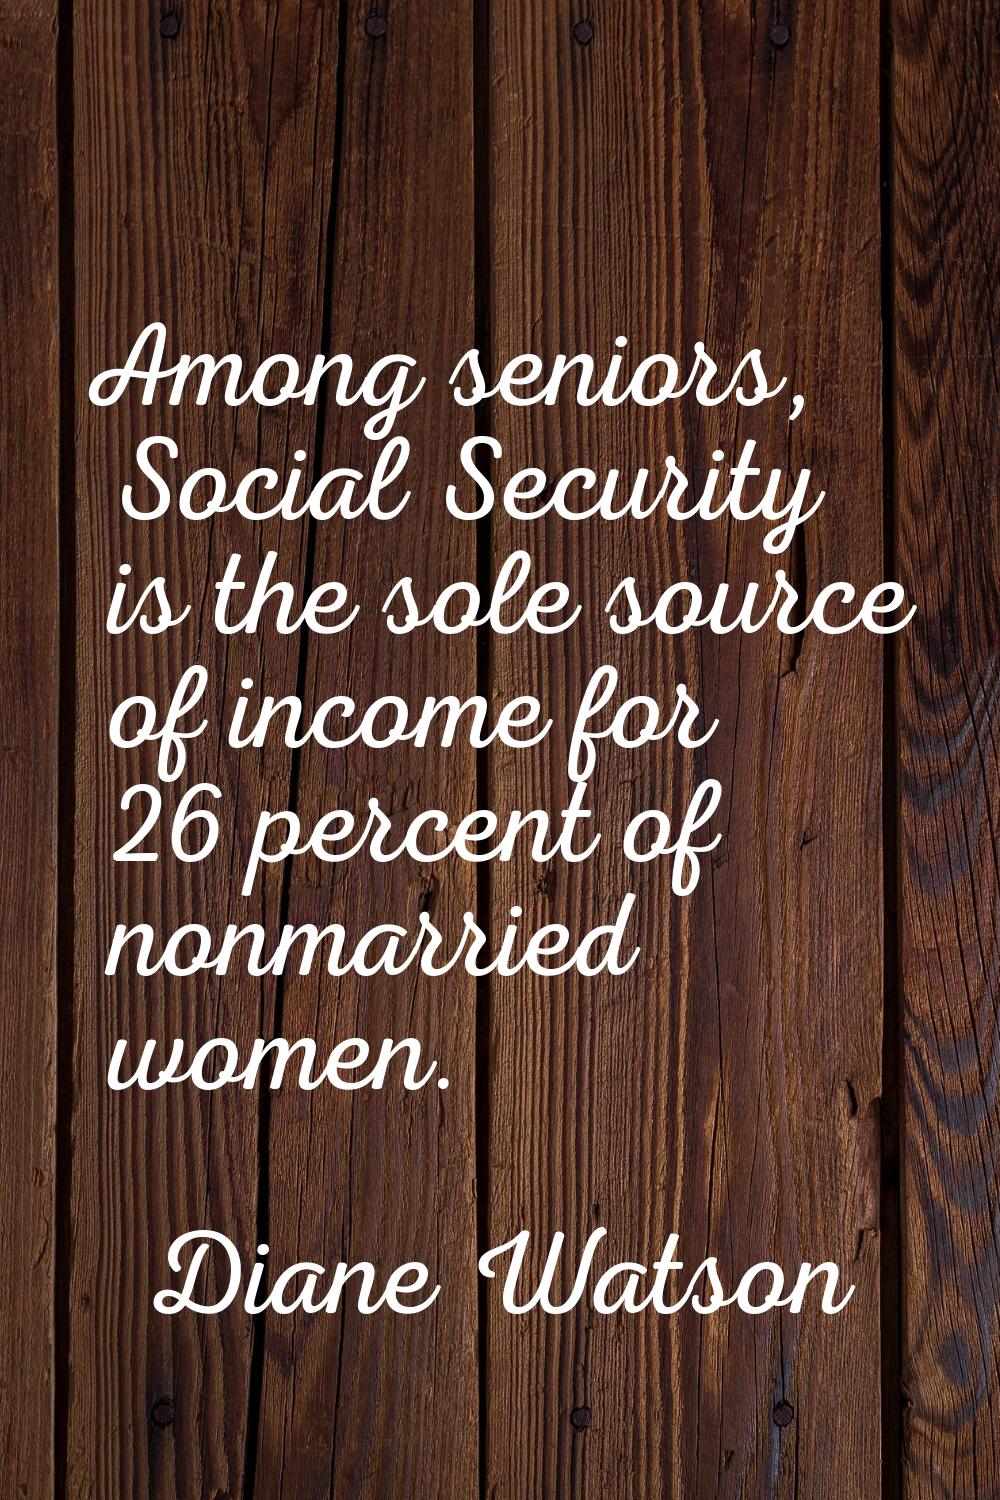 Among seniors, Social Security is the sole source of income for 26 percent of nonmarried women.